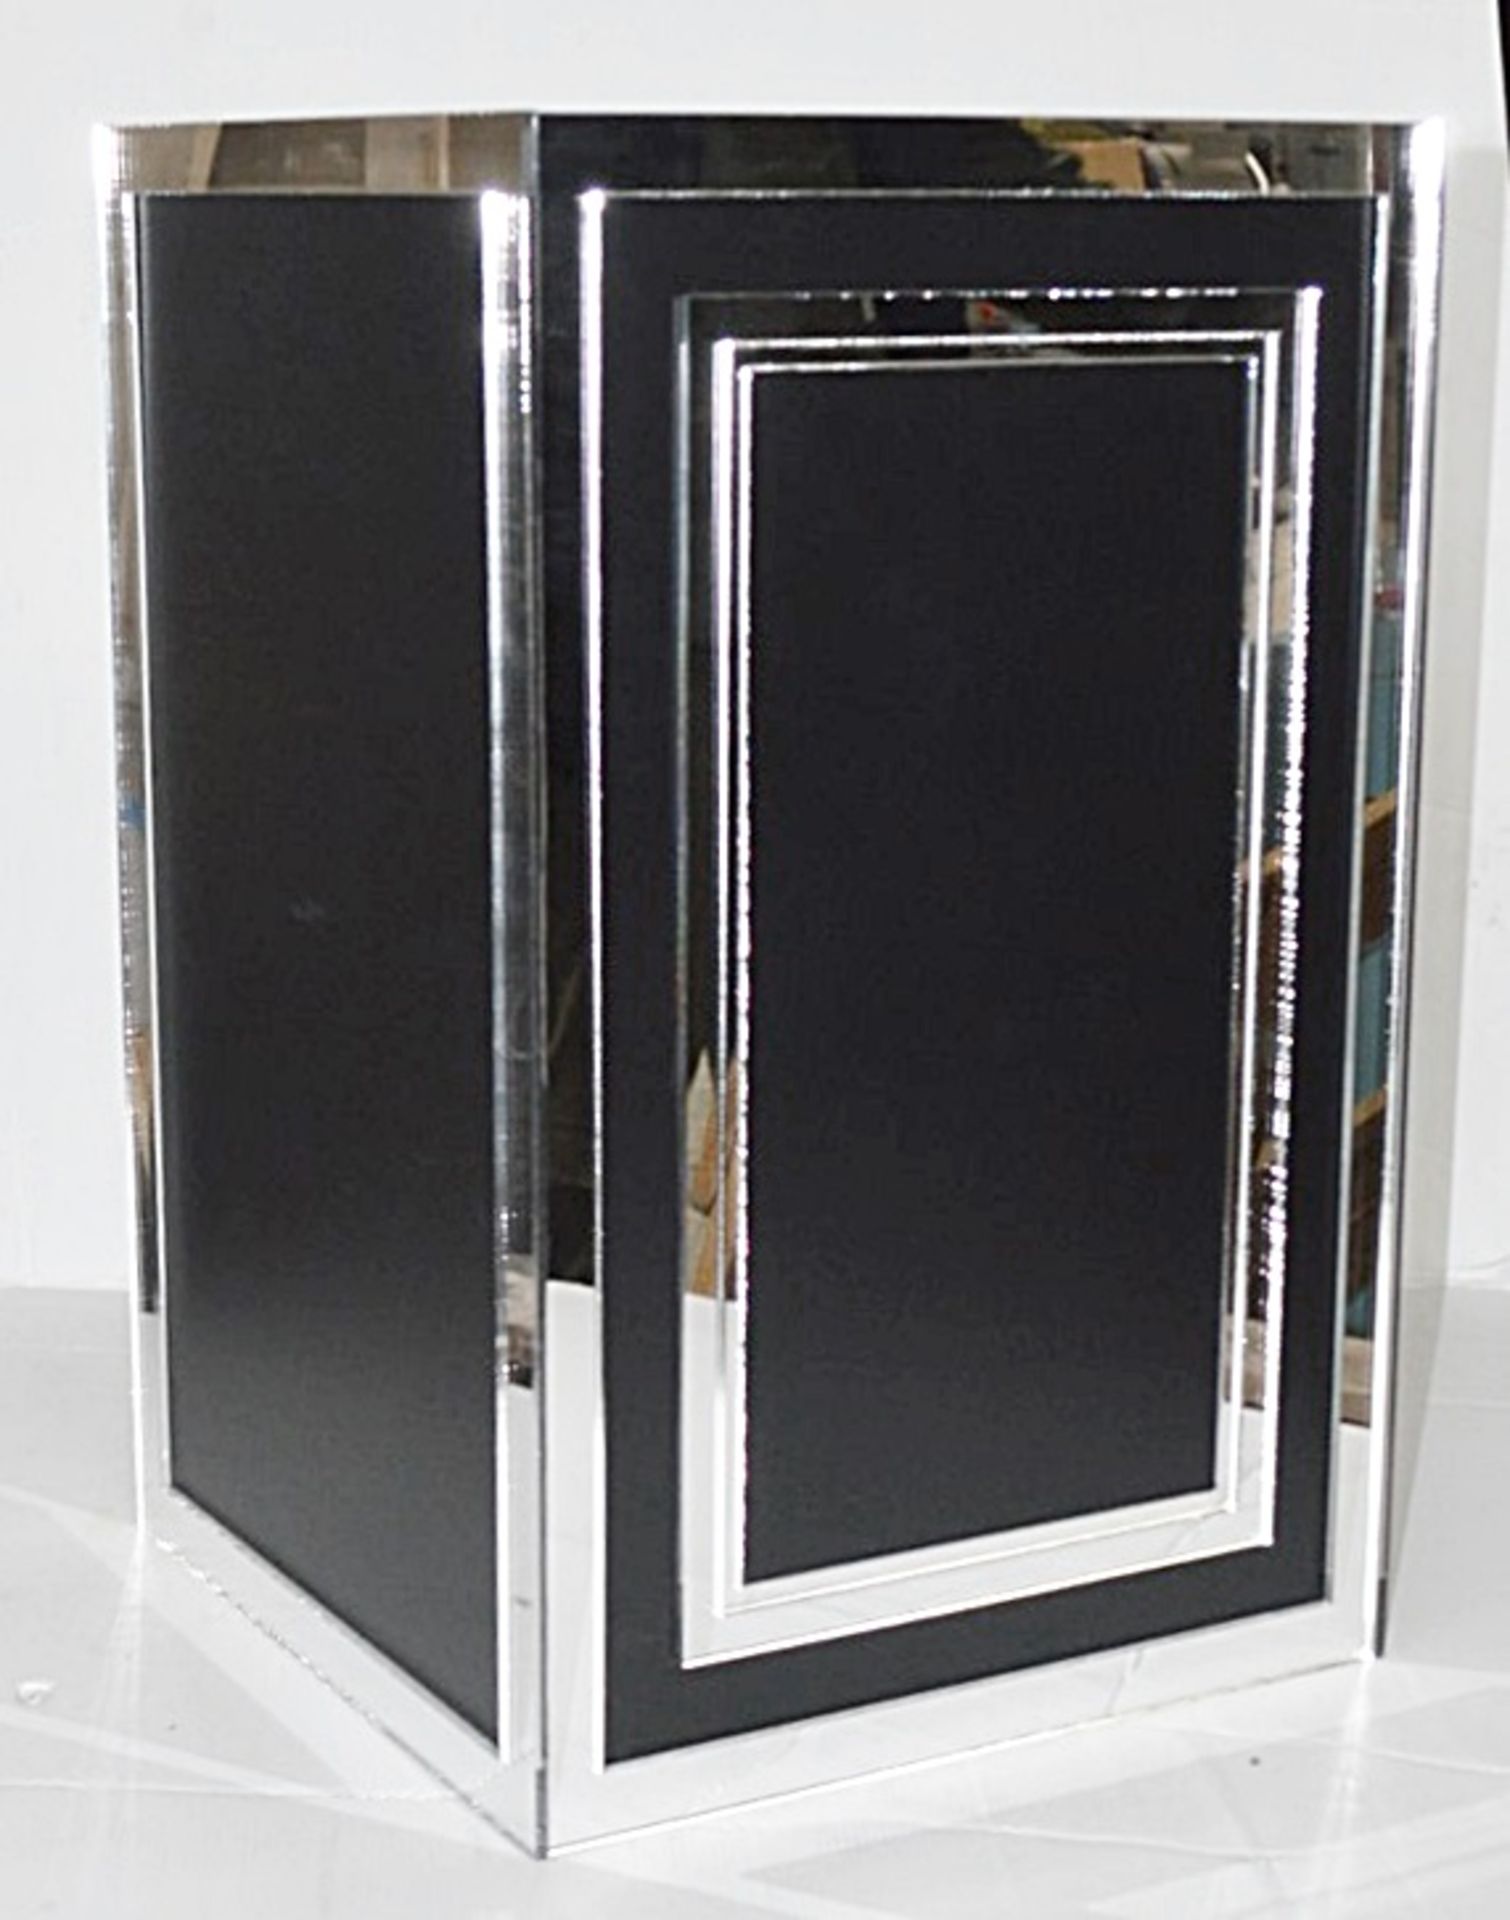 2 x Bank Vault Safe-style Shop Display Dumy Props In Black With Mirrored Decoration - Image 4 of 5